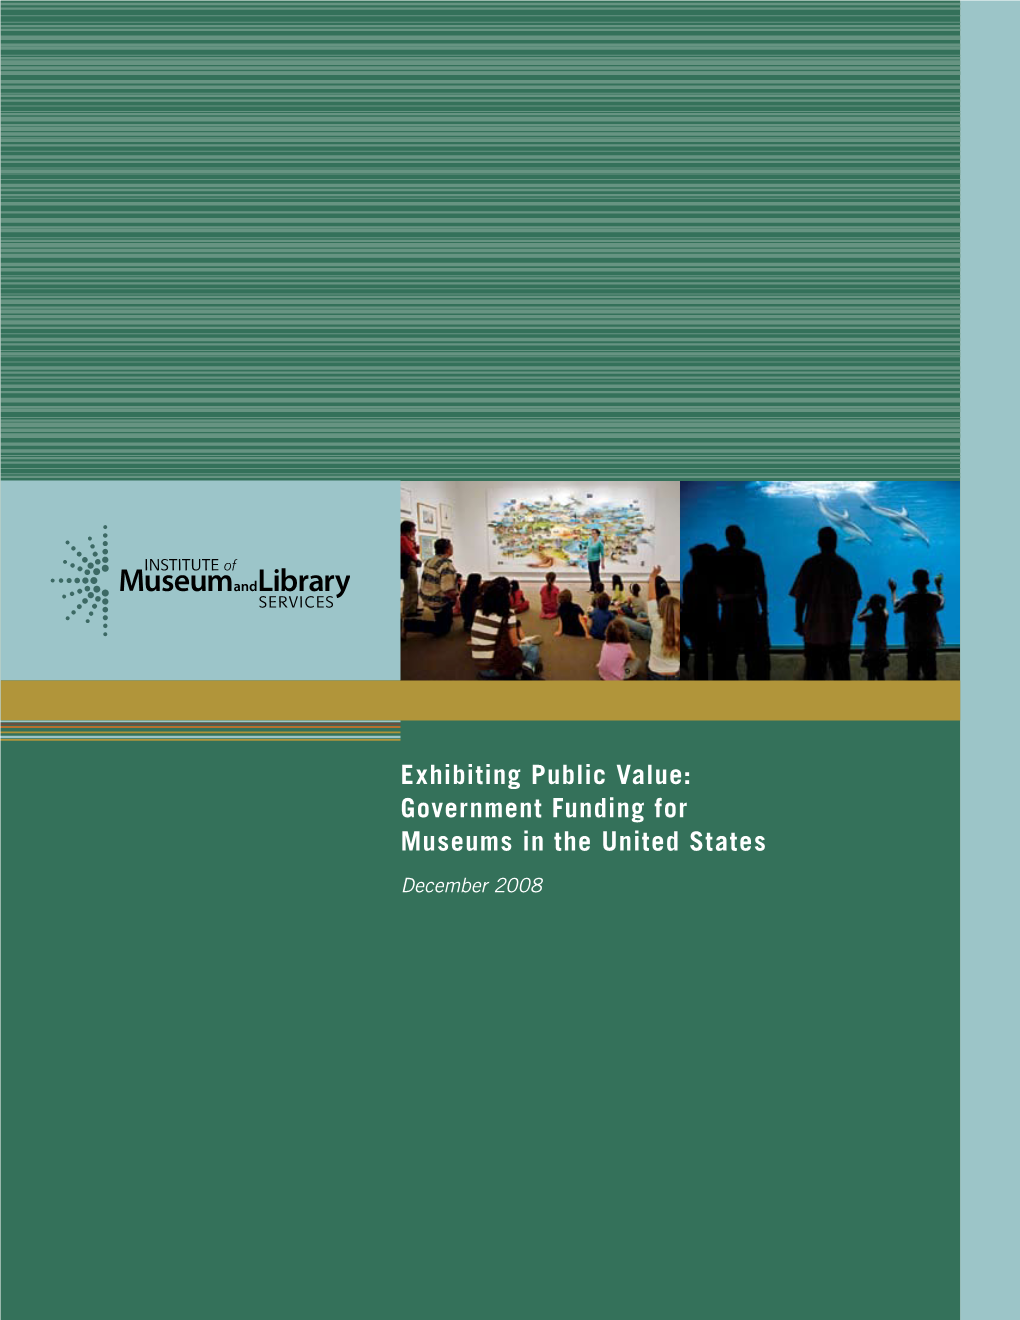 Exhibiting Public Value: Government Funding for Museums in the United States